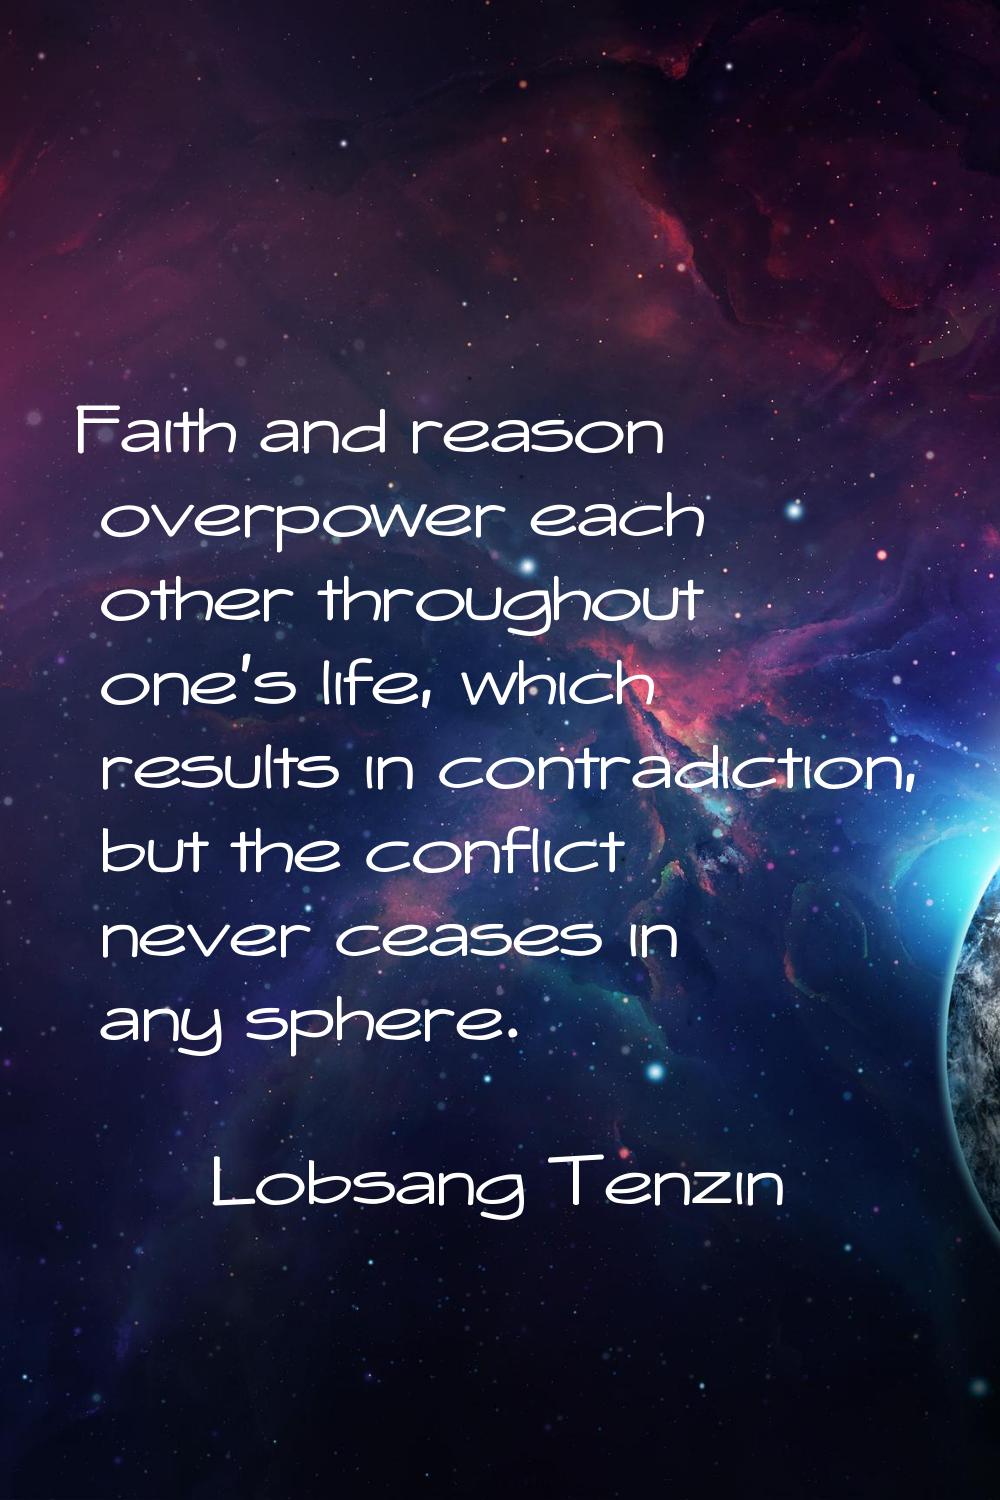 Faith and reason overpower each other throughout one's life, which results in contradiction, but th